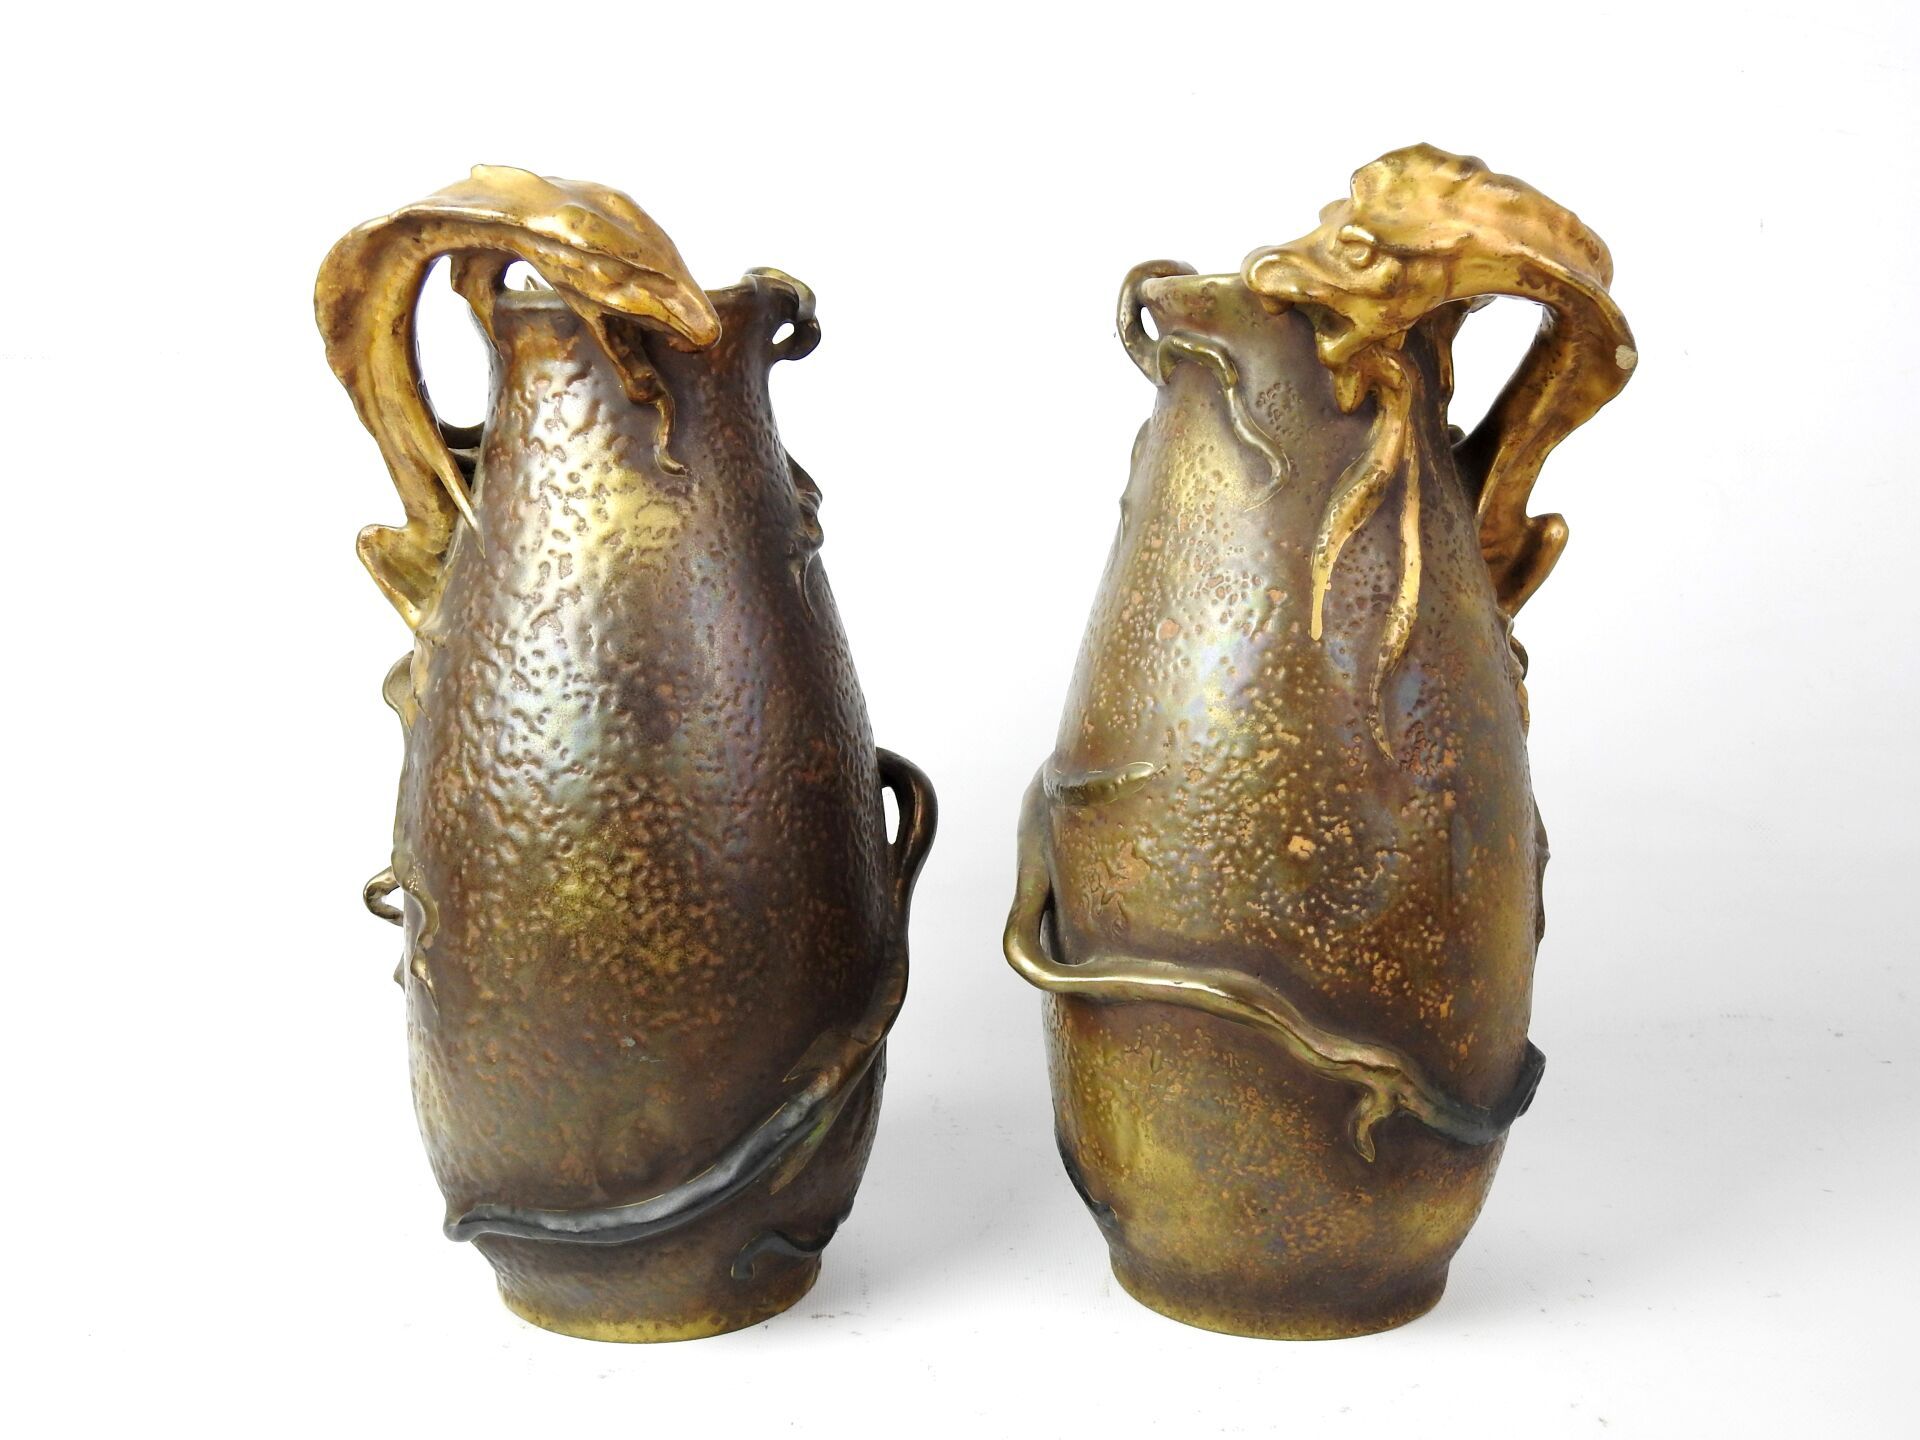 Null Attributed to Eduard STELLMACHER (1868 - 1945) for Amphora 

Rare pair of r&hellip;